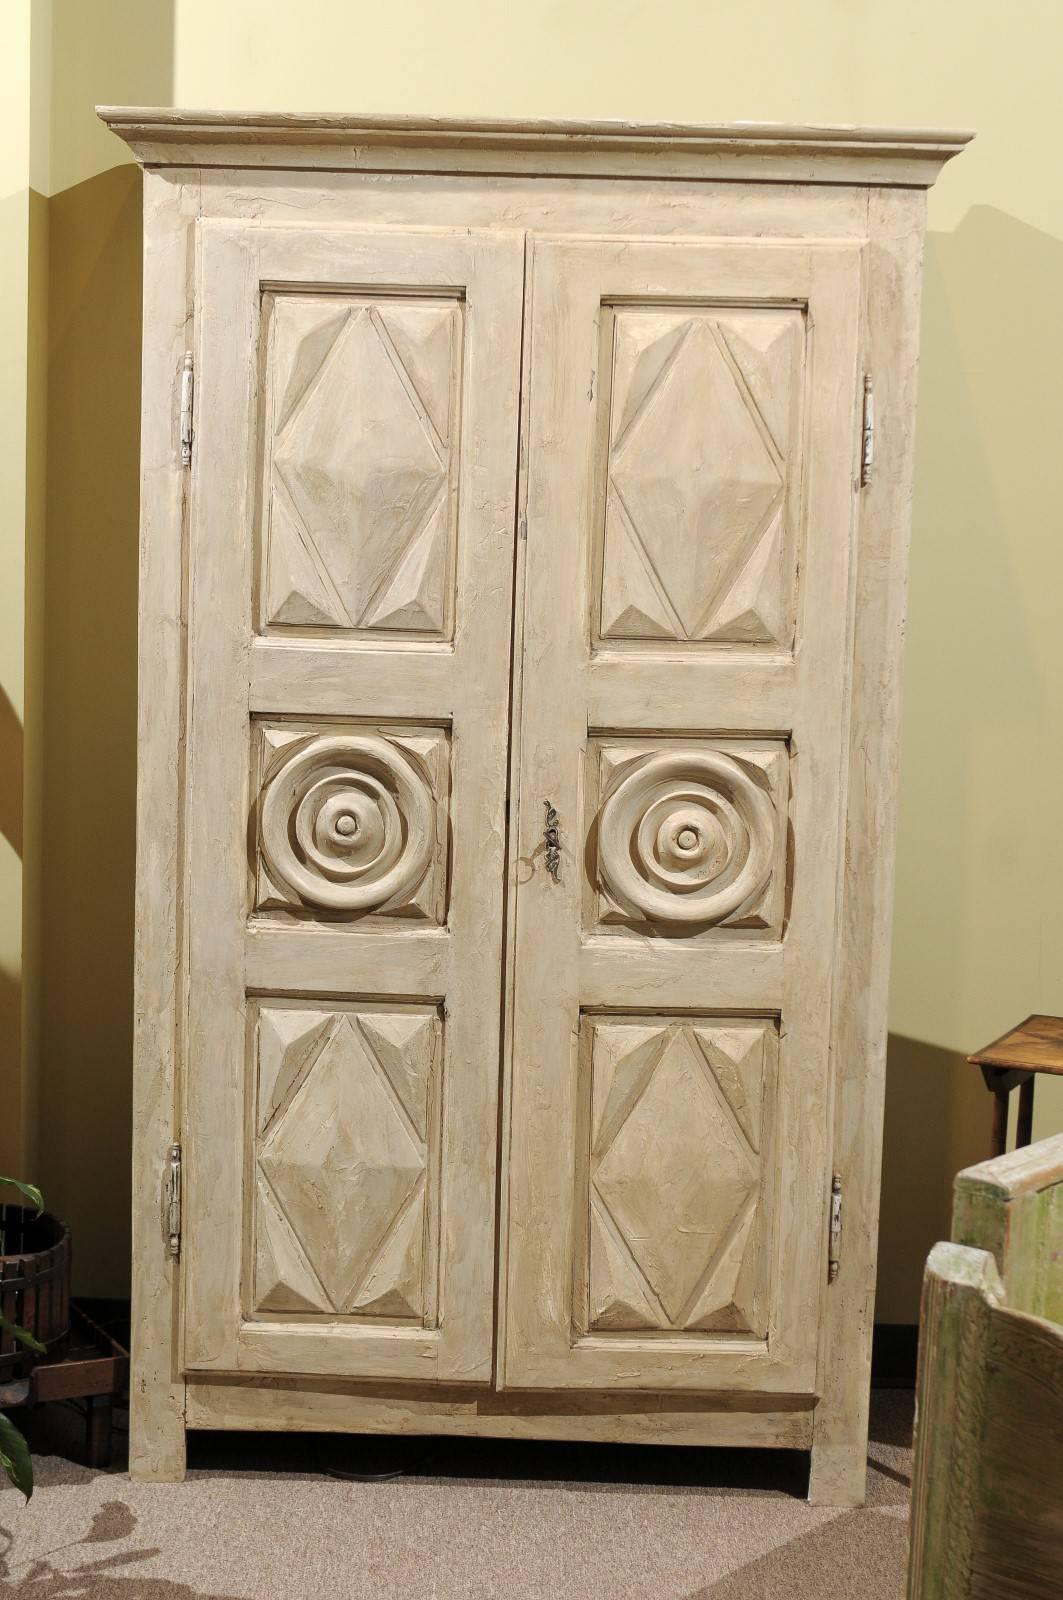 This is a great looking little armoire that has been recently painted. It has a very interesting textured finish which accentuates the angled design and circle pattern on the doors.